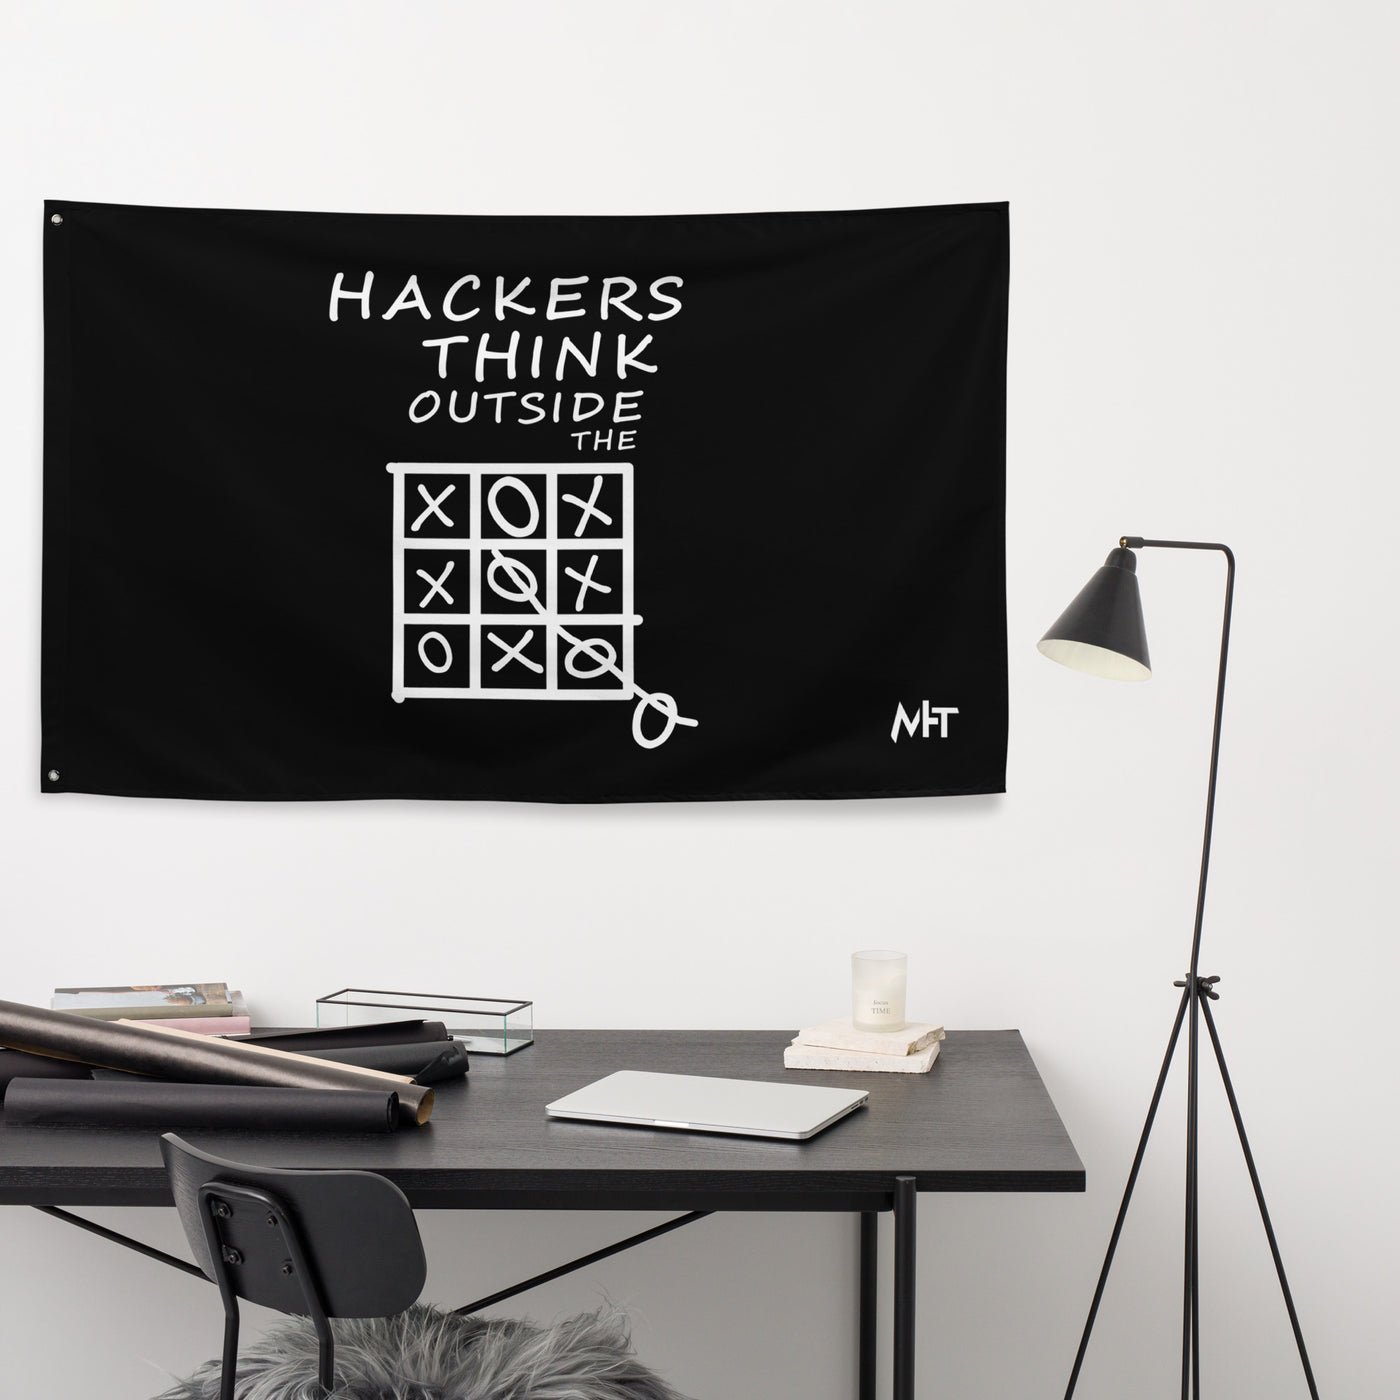 Hackers think outside the box - Flag